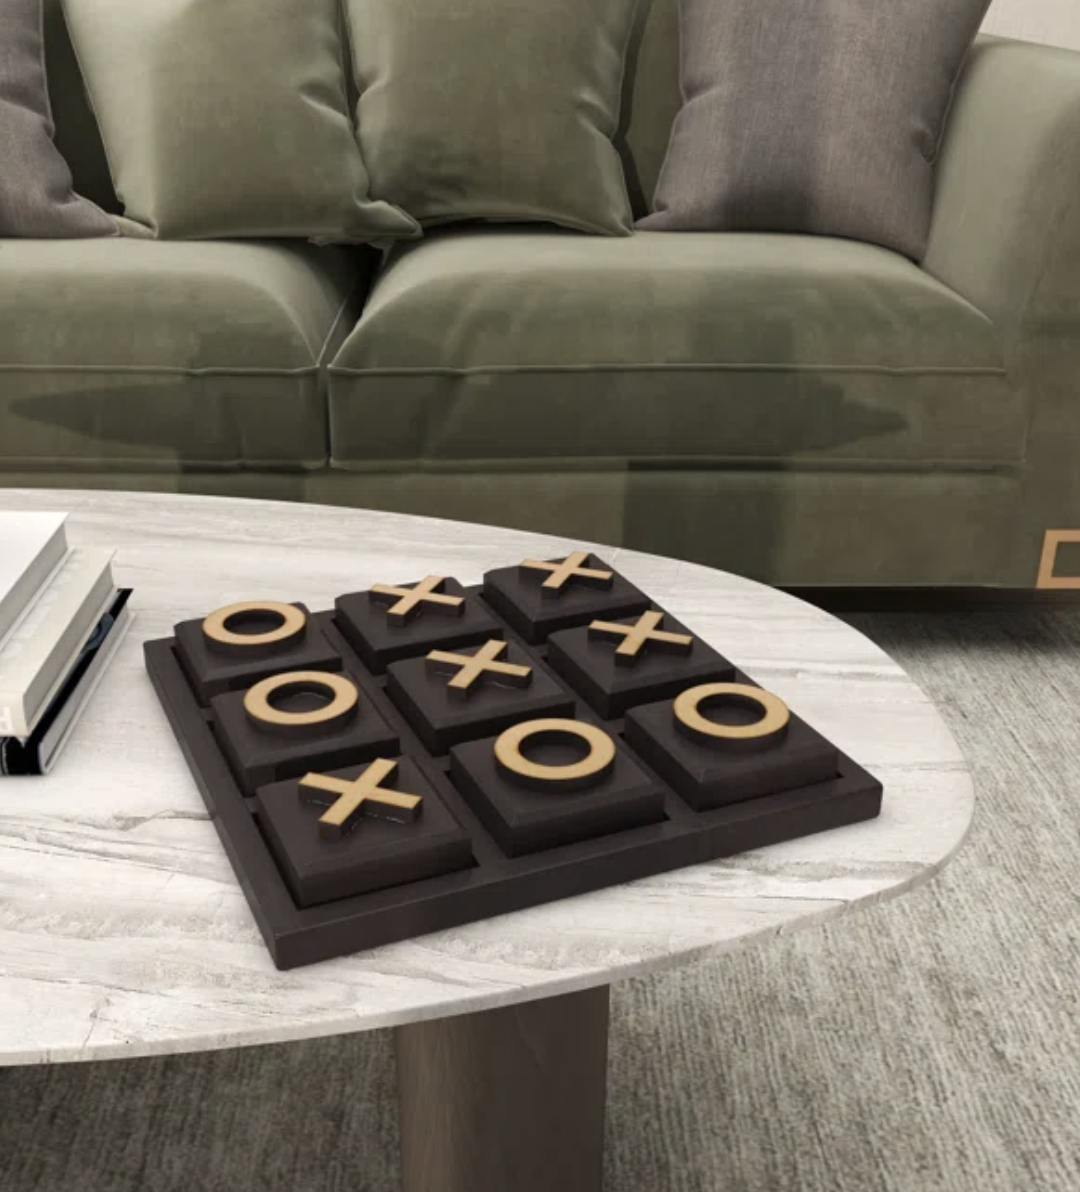 Tic-Tac-Toe game on a marble table in a living room setting